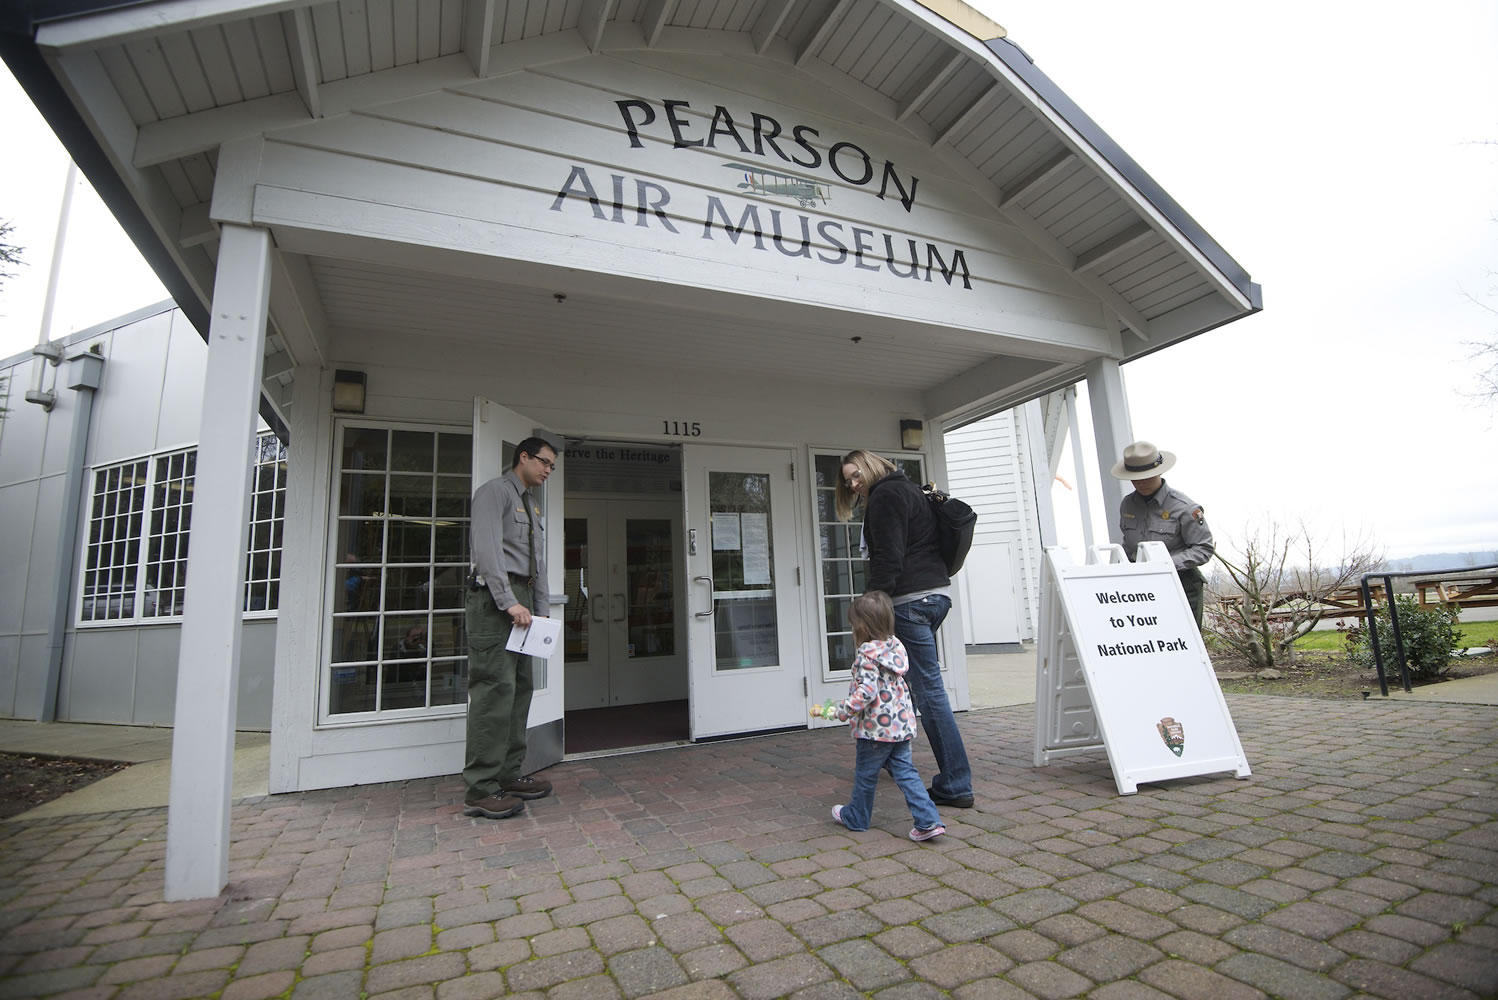 Aaron Ochoa, a National Park Service ranger, left, opens a door at the reopening of the Pearson Air Museum on Feb. 2, 2013.